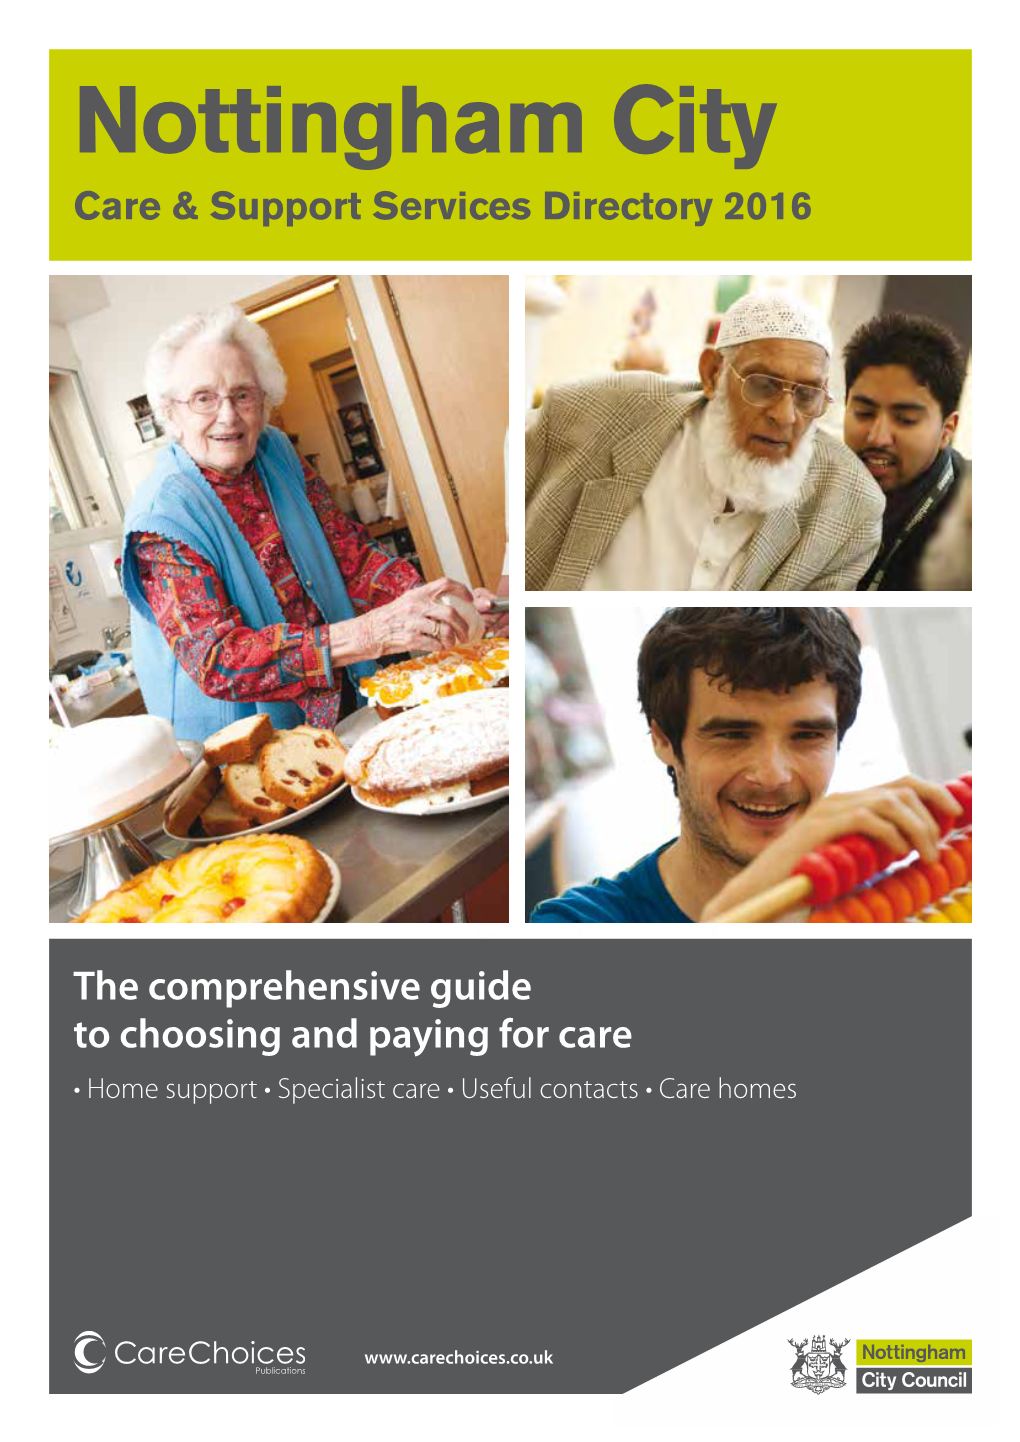 Nottingham City Care & Support Services Directory 2016